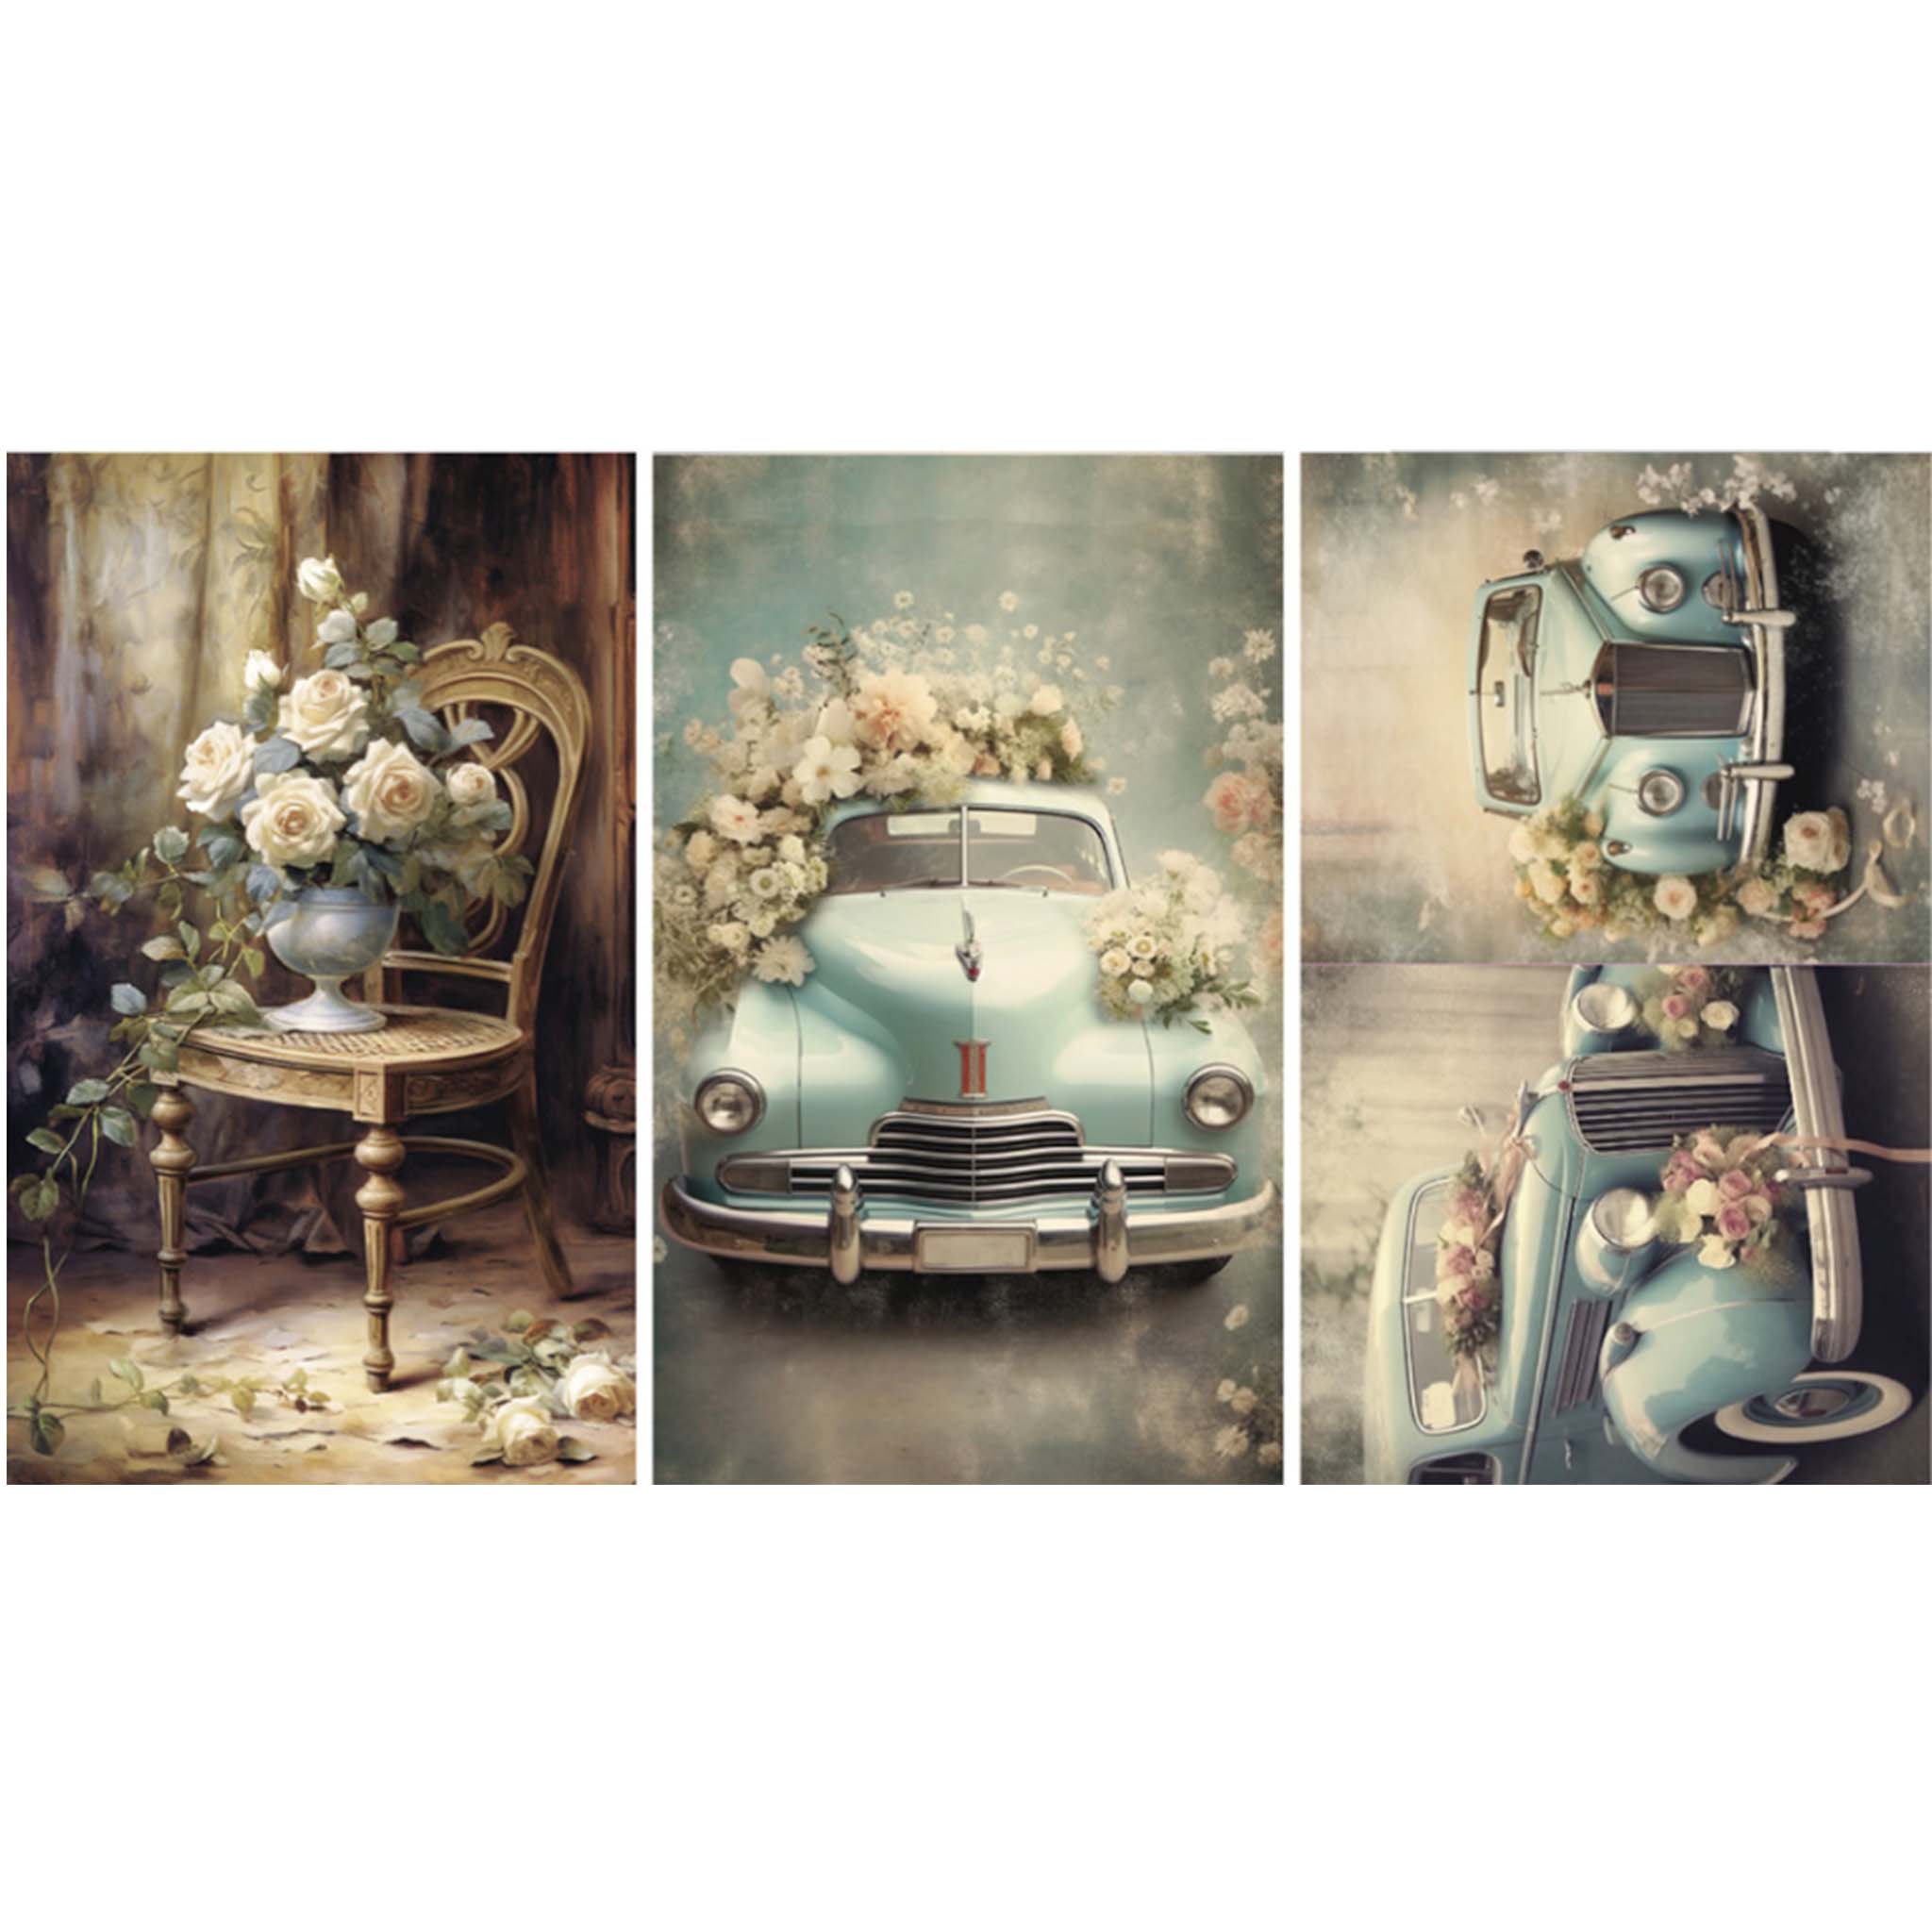 Tissue paper with 3 designs that feature two side by side views of a retro floral car in baby blue, a vintage aqua blue car, and a bouquet of roses on a chair are against a white background.